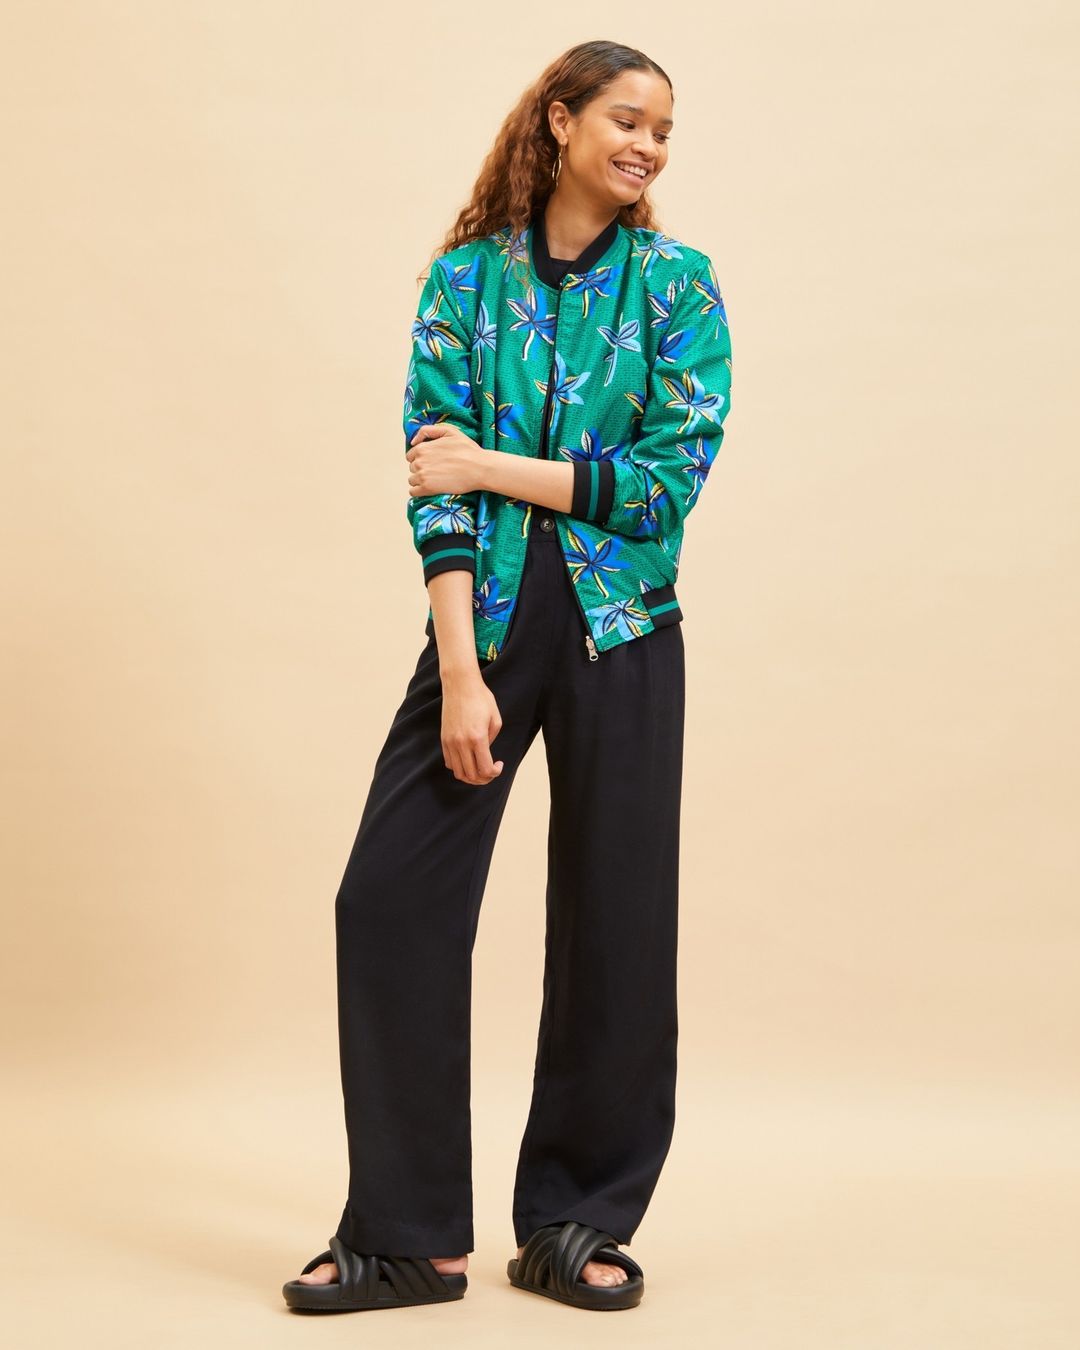 Loungewear in Africa - Mille Collines - a green jacket and black pants